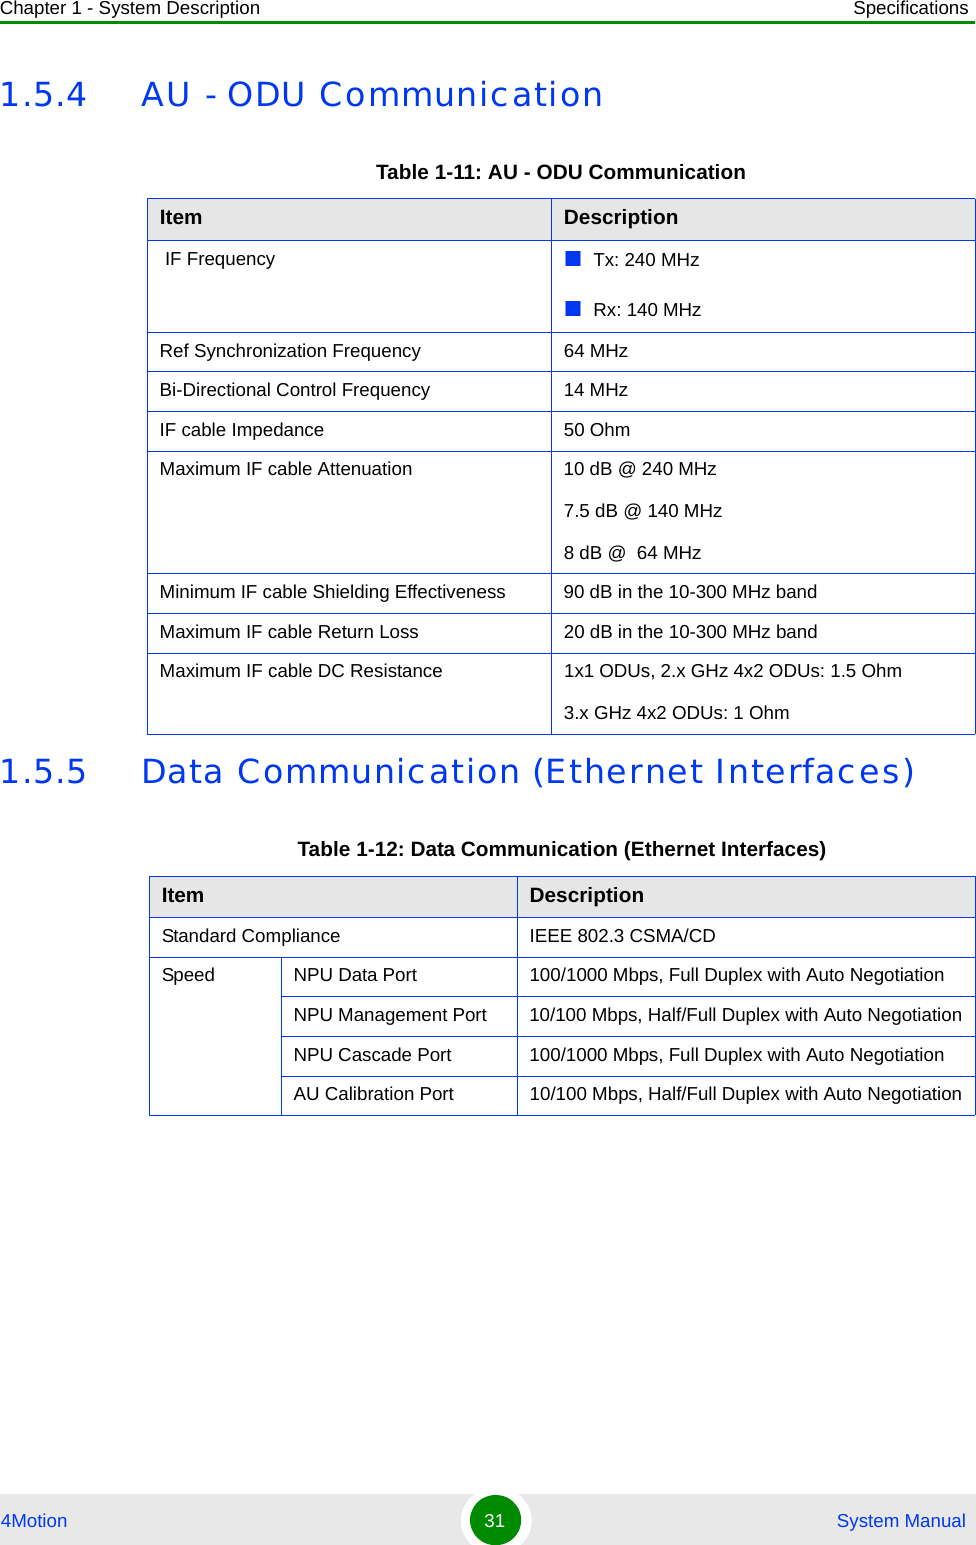 Chapter 1 - System Description Specifications4Motion 31  System Manual1.5.4 AU - ODU Communication1.5.5 Data Communication (Ethernet Interfaces)Table 1-11: AU - ODU CommunicationItem Description IF Frequency Tx: 240 MHzRx: 140 MHzRef Synchronization Frequency 64 MHzBi-Directional Control Frequency 14 MHzIF cable Impedance 50 OhmMaximum IF cable Attenuation   10 dB @ 240 MHz7.5 dB @ 140 MHz8 dB @  64 MHzMinimum IF cable Shielding Effectiveness 90 dB in the 10-300 MHz bandMaximum IF cable Return Loss 20 dB in the 10-300 MHz bandMaximum IF cable DC Resistance 1x1 ODUs, 2.x GHz 4x2 ODUs: 1.5 Ohm3.x GHz 4x2 ODUs: 1 OhmTable 1-12: Data Communication (Ethernet Interfaces)Item DescriptionStandard Compliance IEEE 802.3 CSMA/CDSpeed NPU Data Port  100/1000 Mbps, Full Duplex with Auto NegotiationNPU Management Port  10/100 Mbps, Half/Full Duplex with Auto NegotiationNPU Cascade Port 100/1000 Mbps, Full Duplex with Auto NegotiationAU Calibration Port 10/100 Mbps, Half/Full Duplex with Auto Negotiation